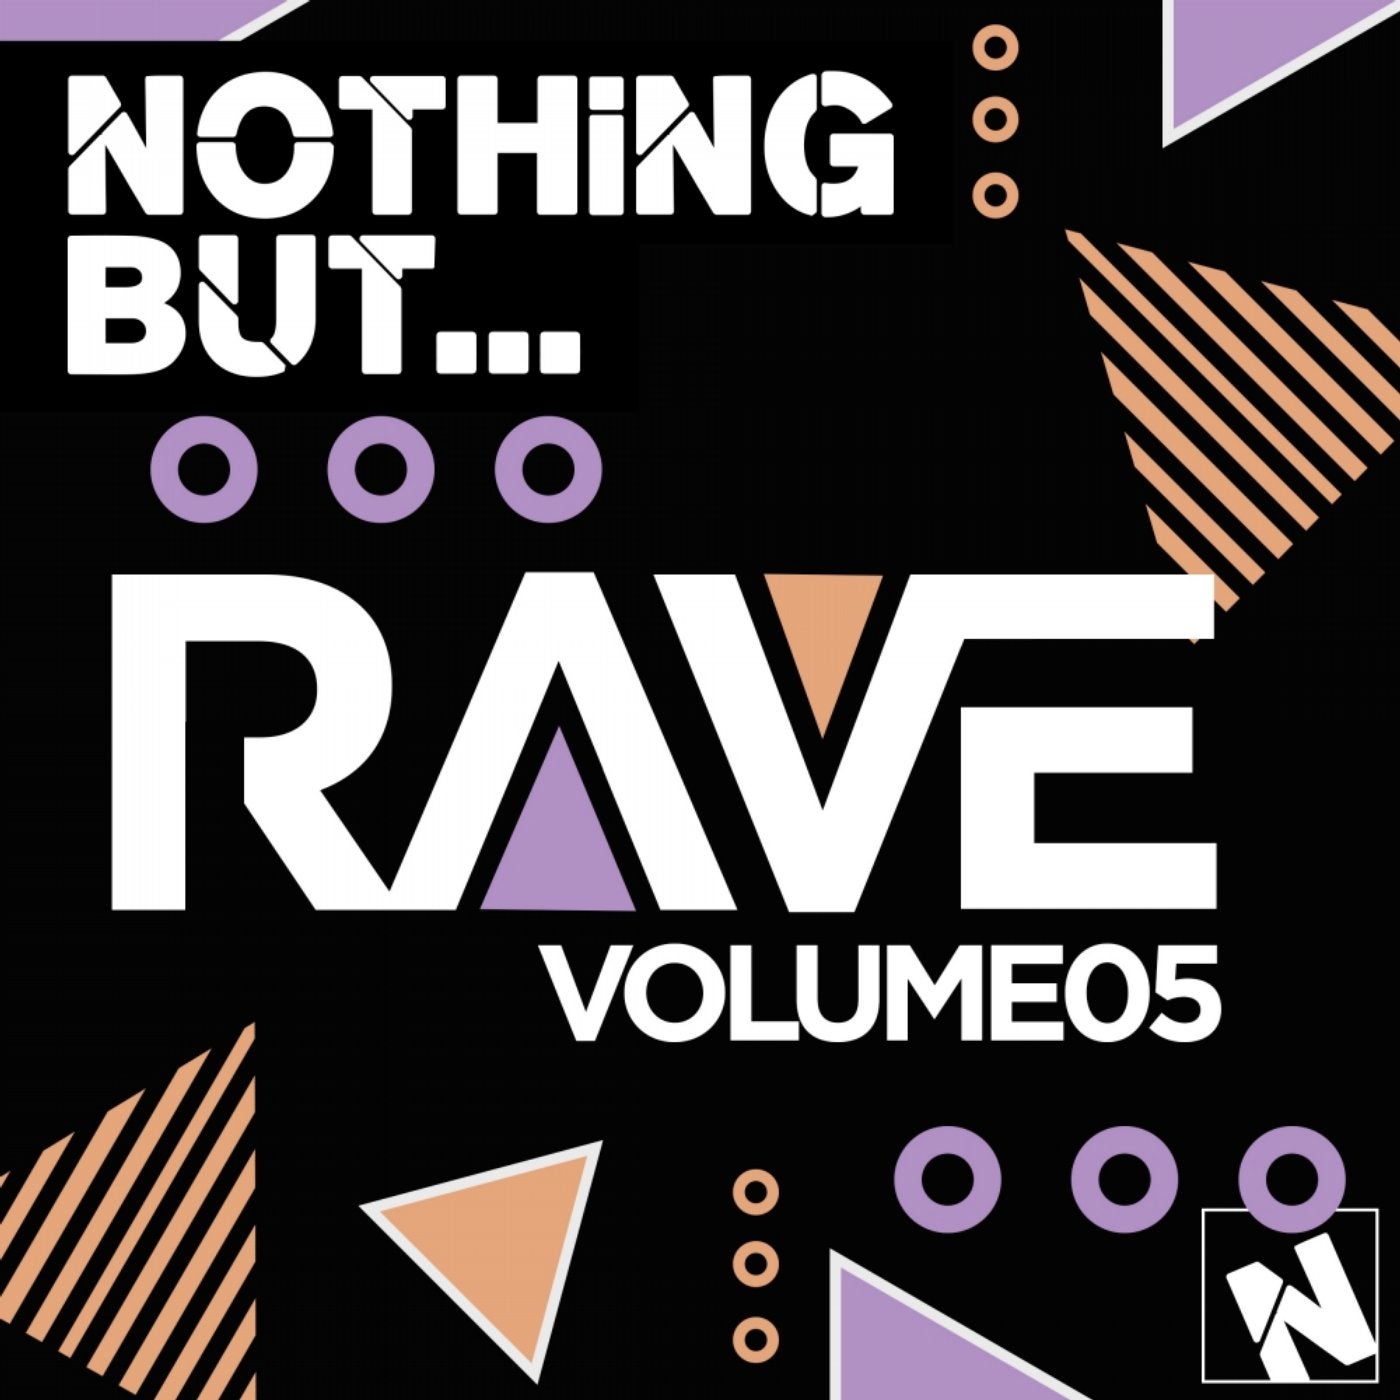 Nothing But... Rave, Vol. 5